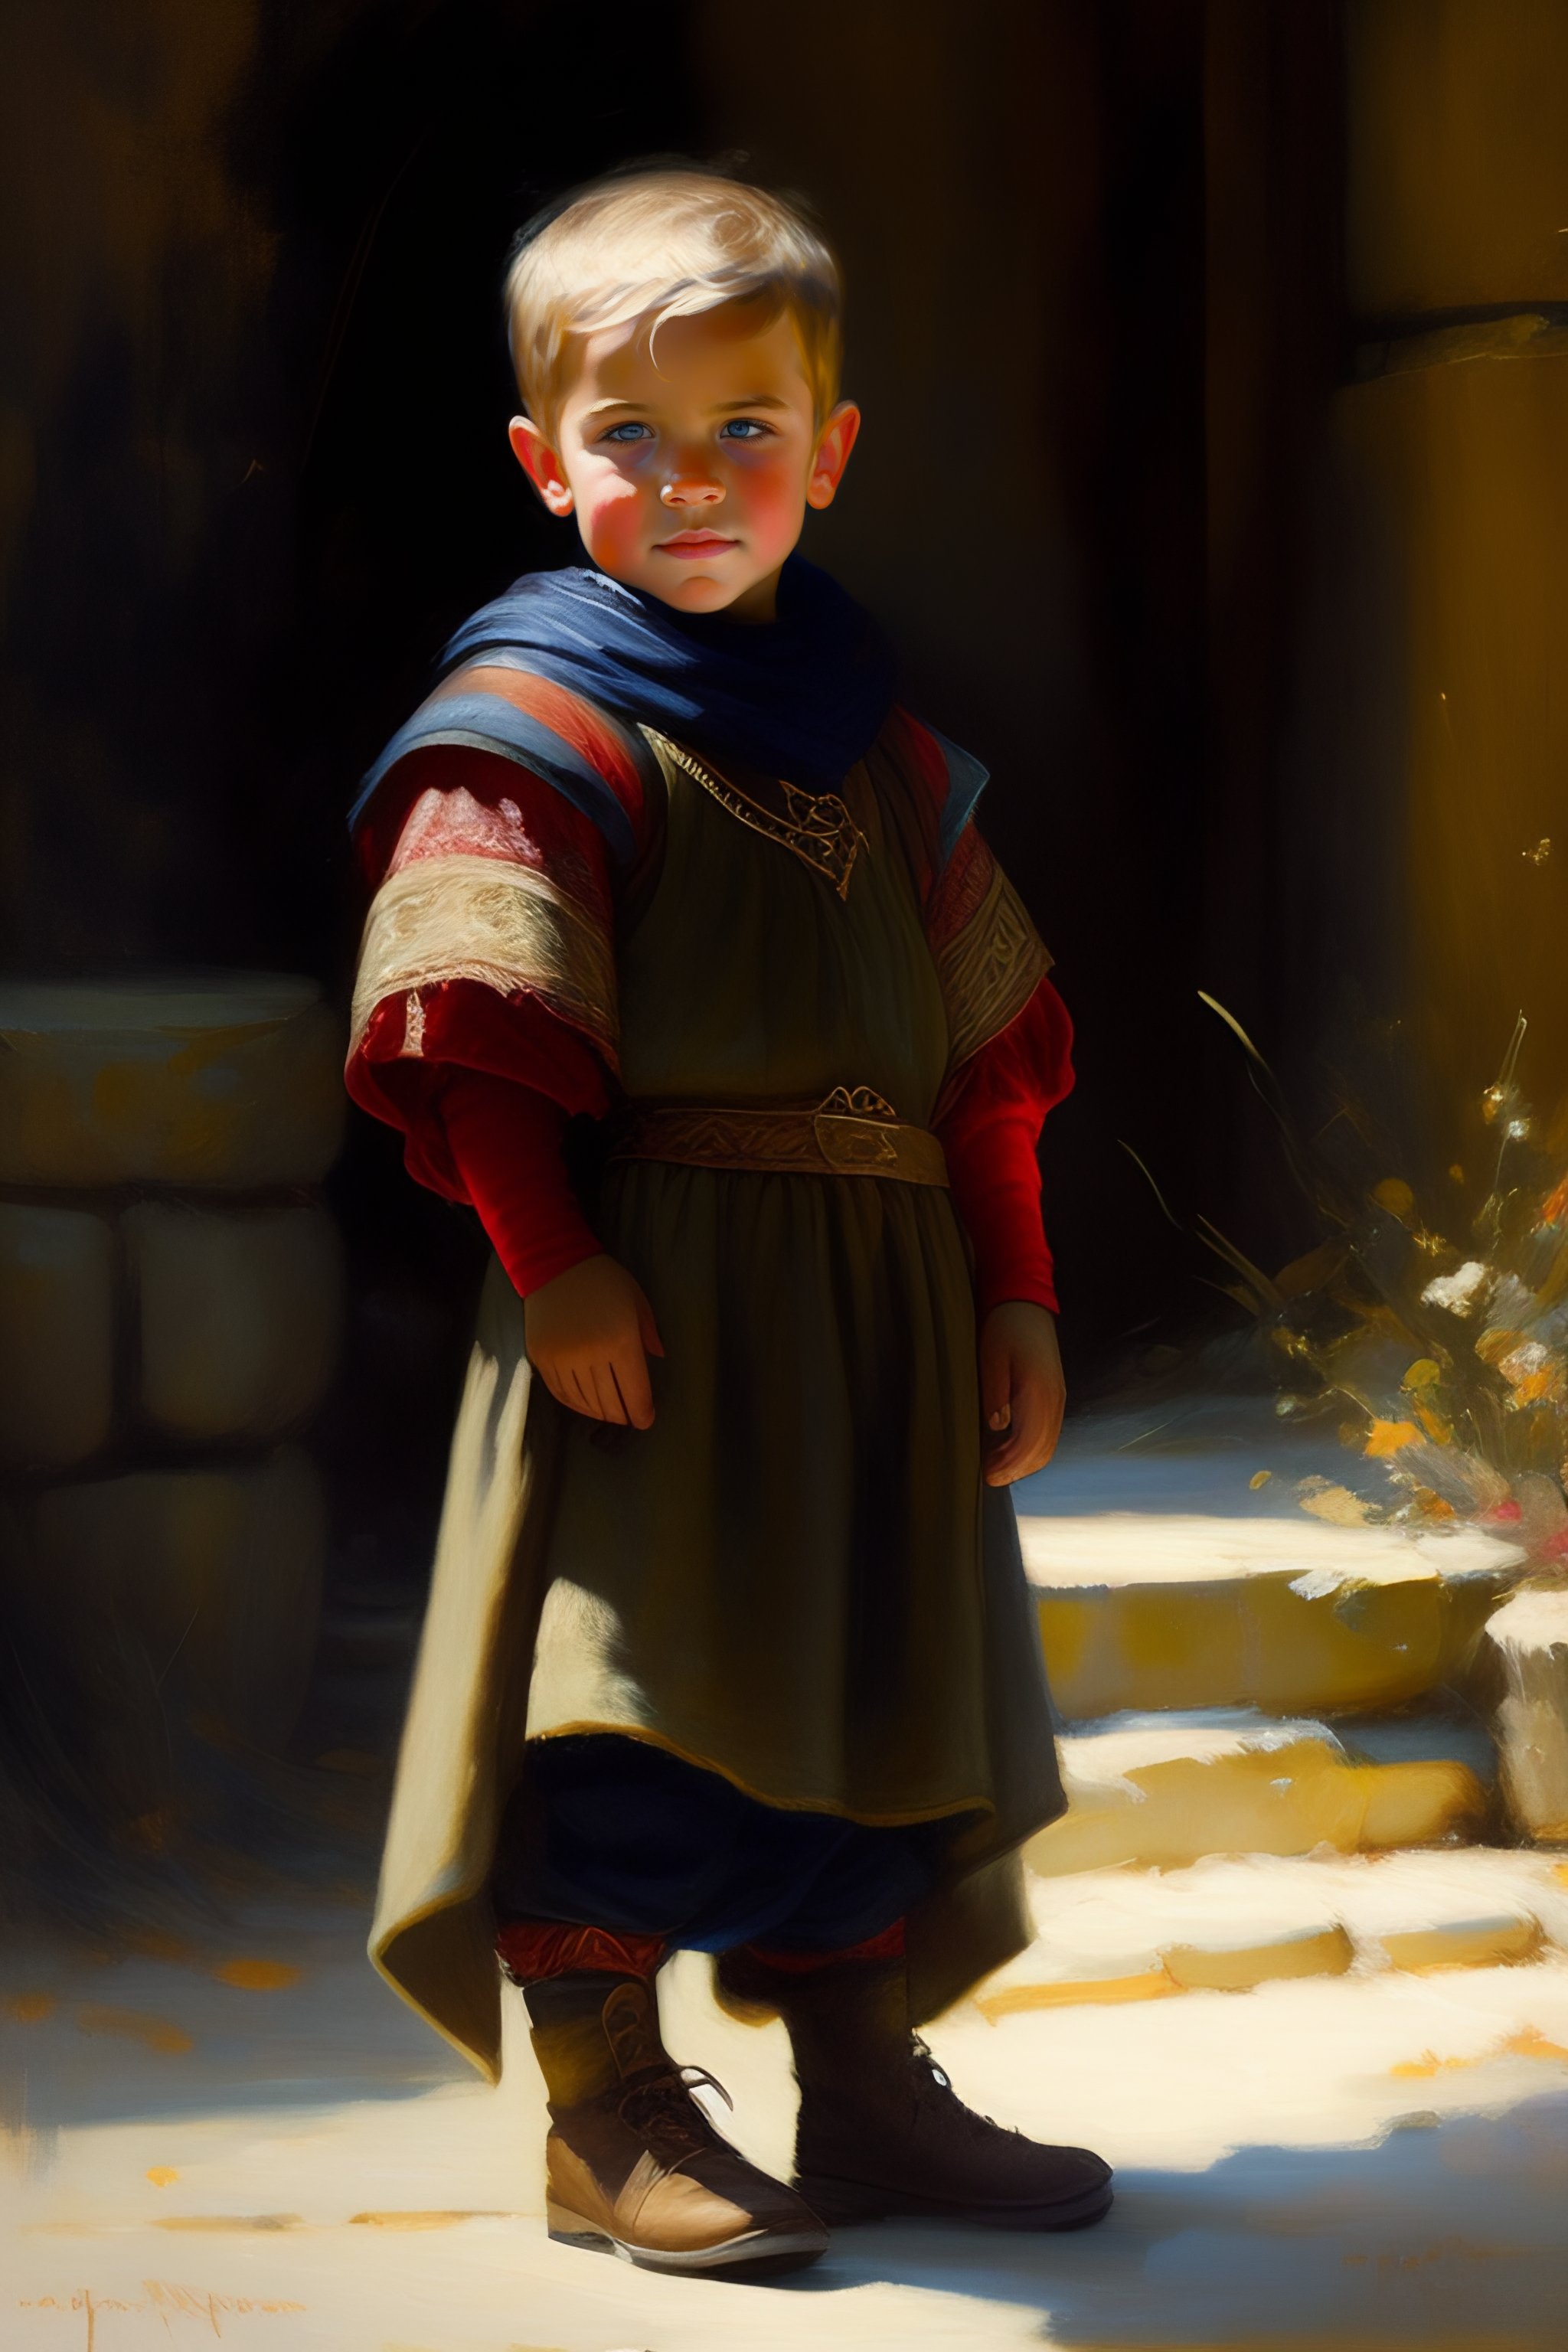 medieval clothing for peasant children